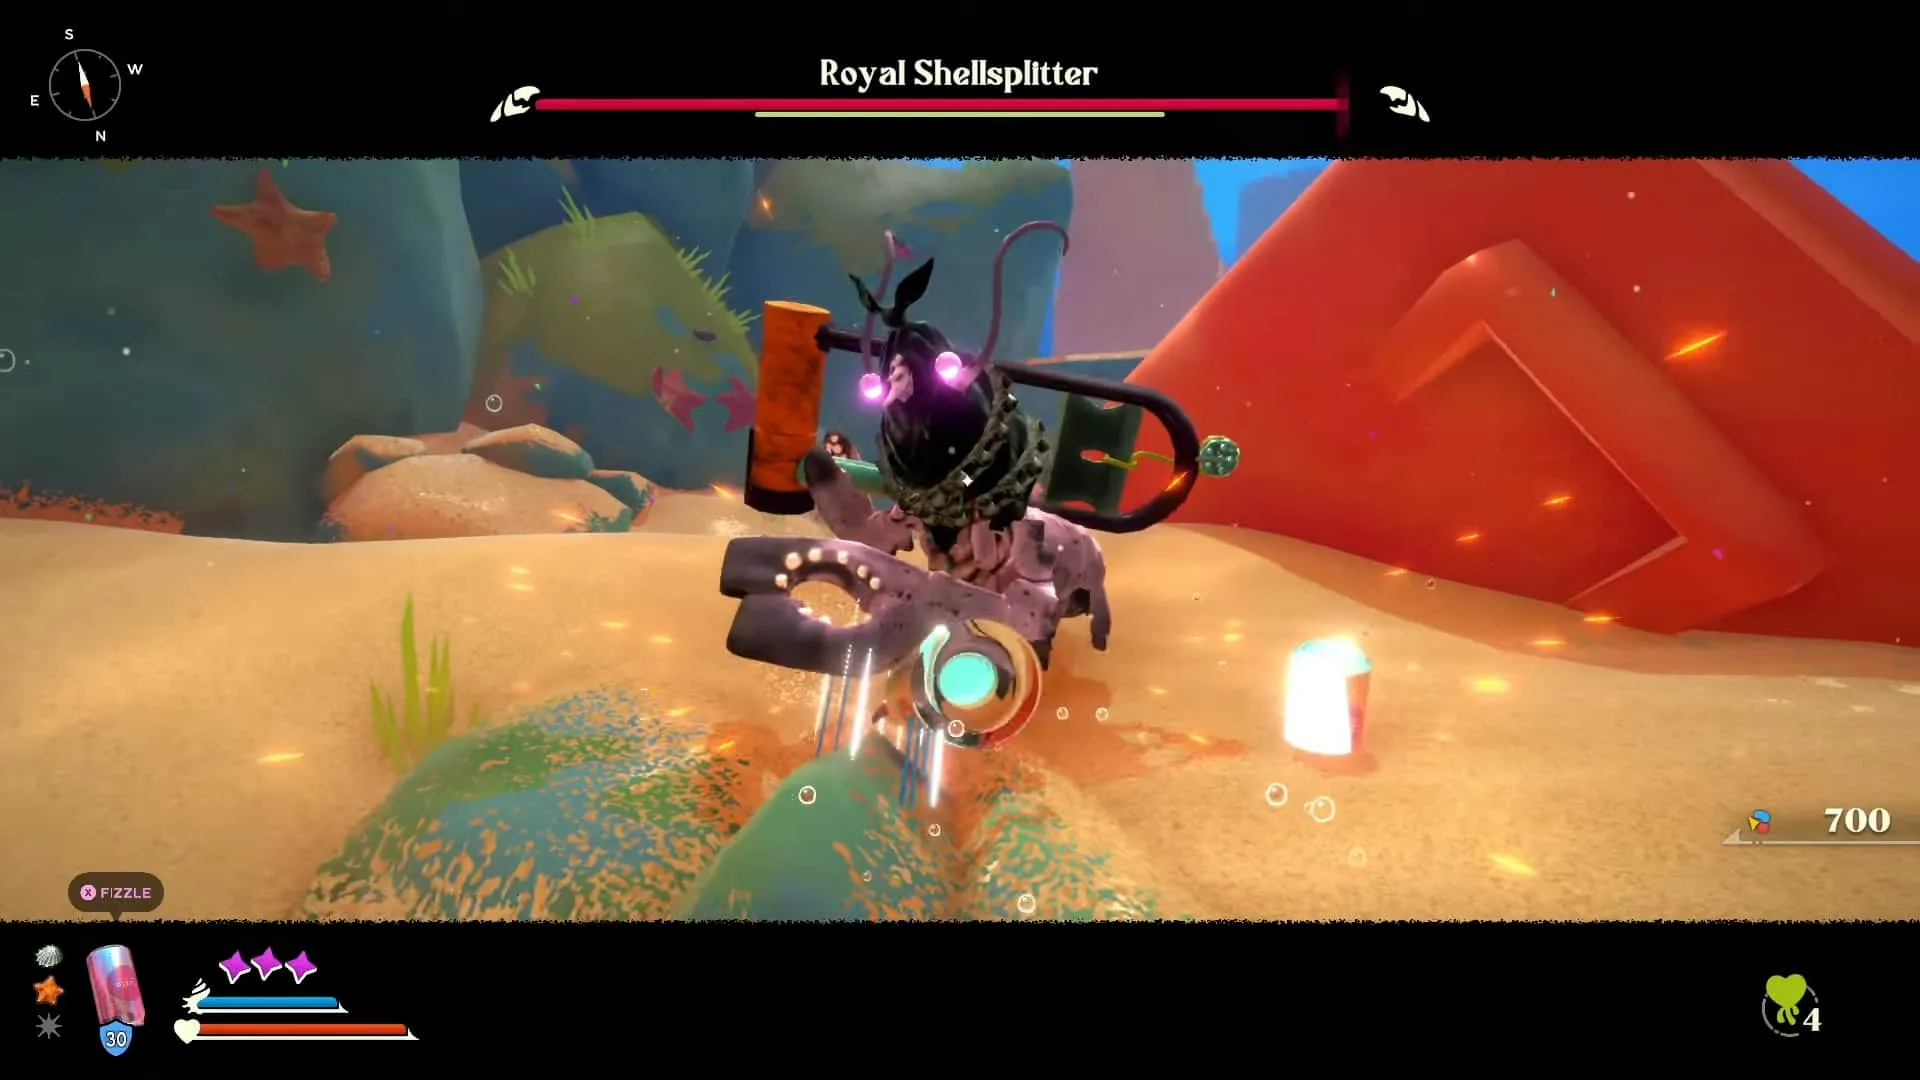 Another Crab’s Treasure: How to defeat the Royal Shellsplitter